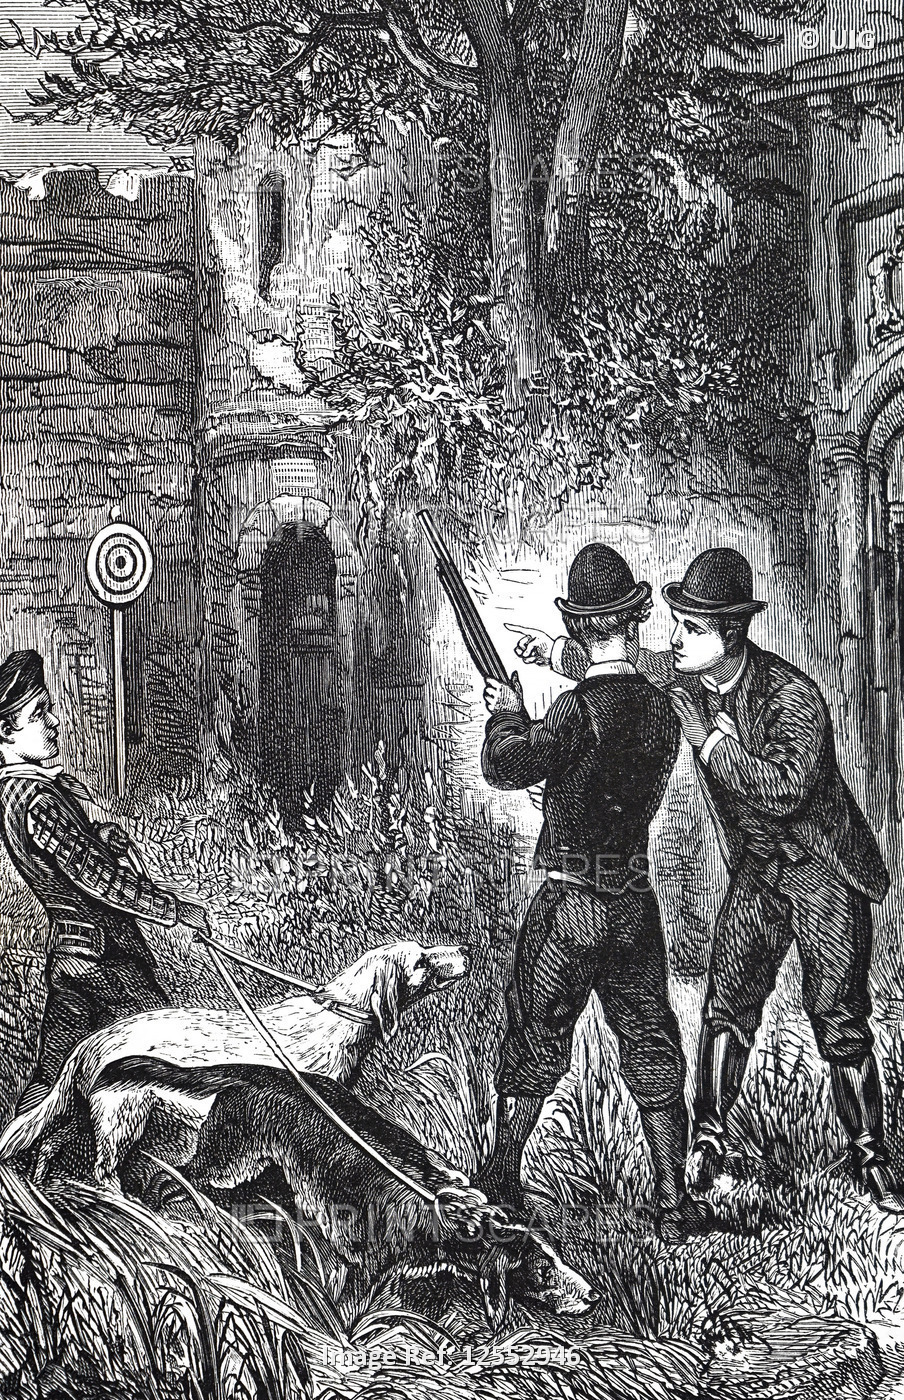 Engraving depicting a shooting lesson, 19th century